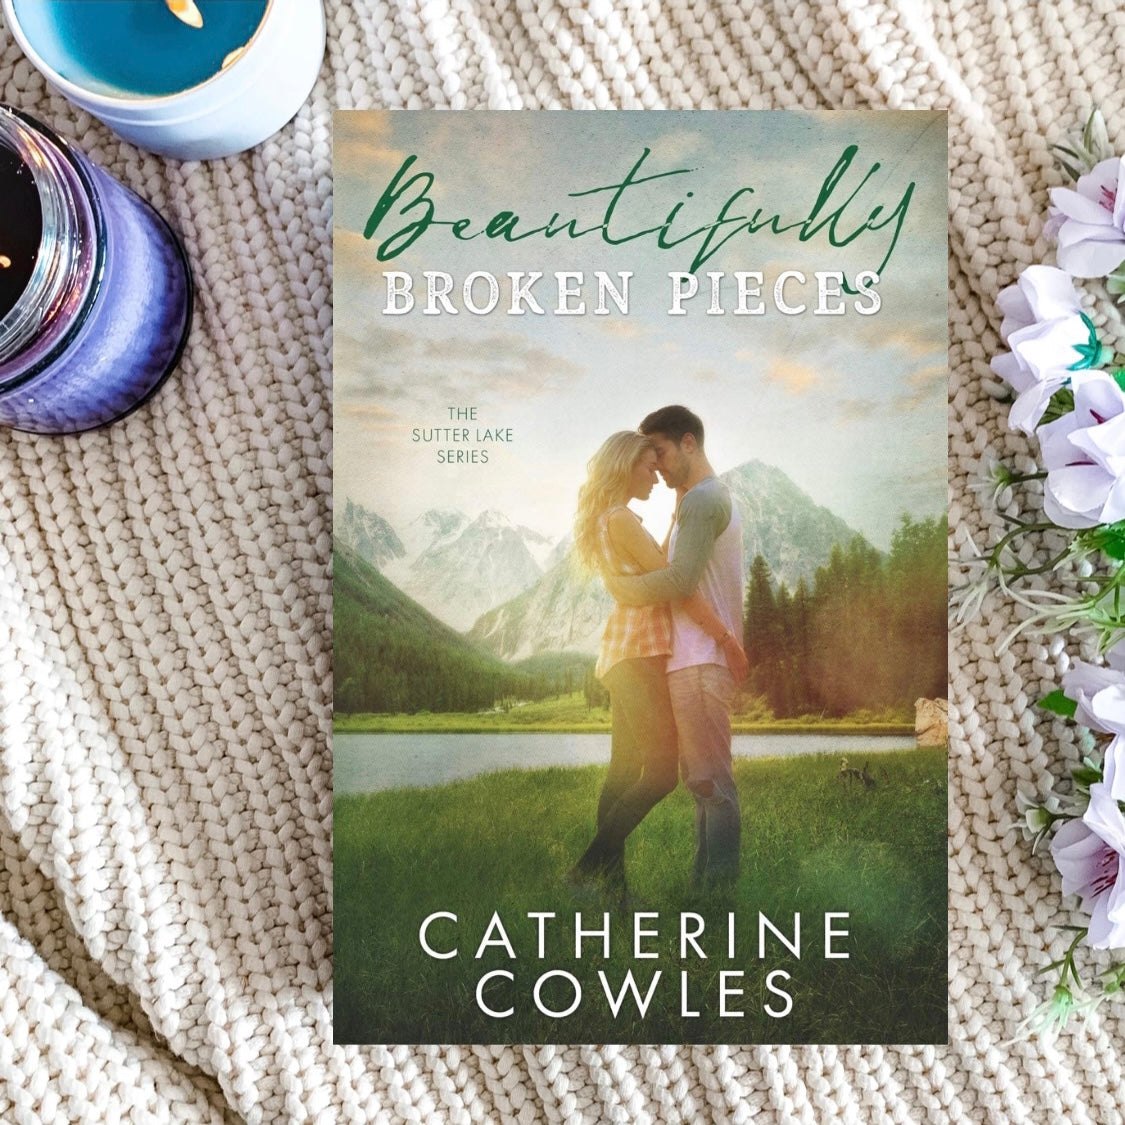 Sutter Lake series by Catherine Cowles